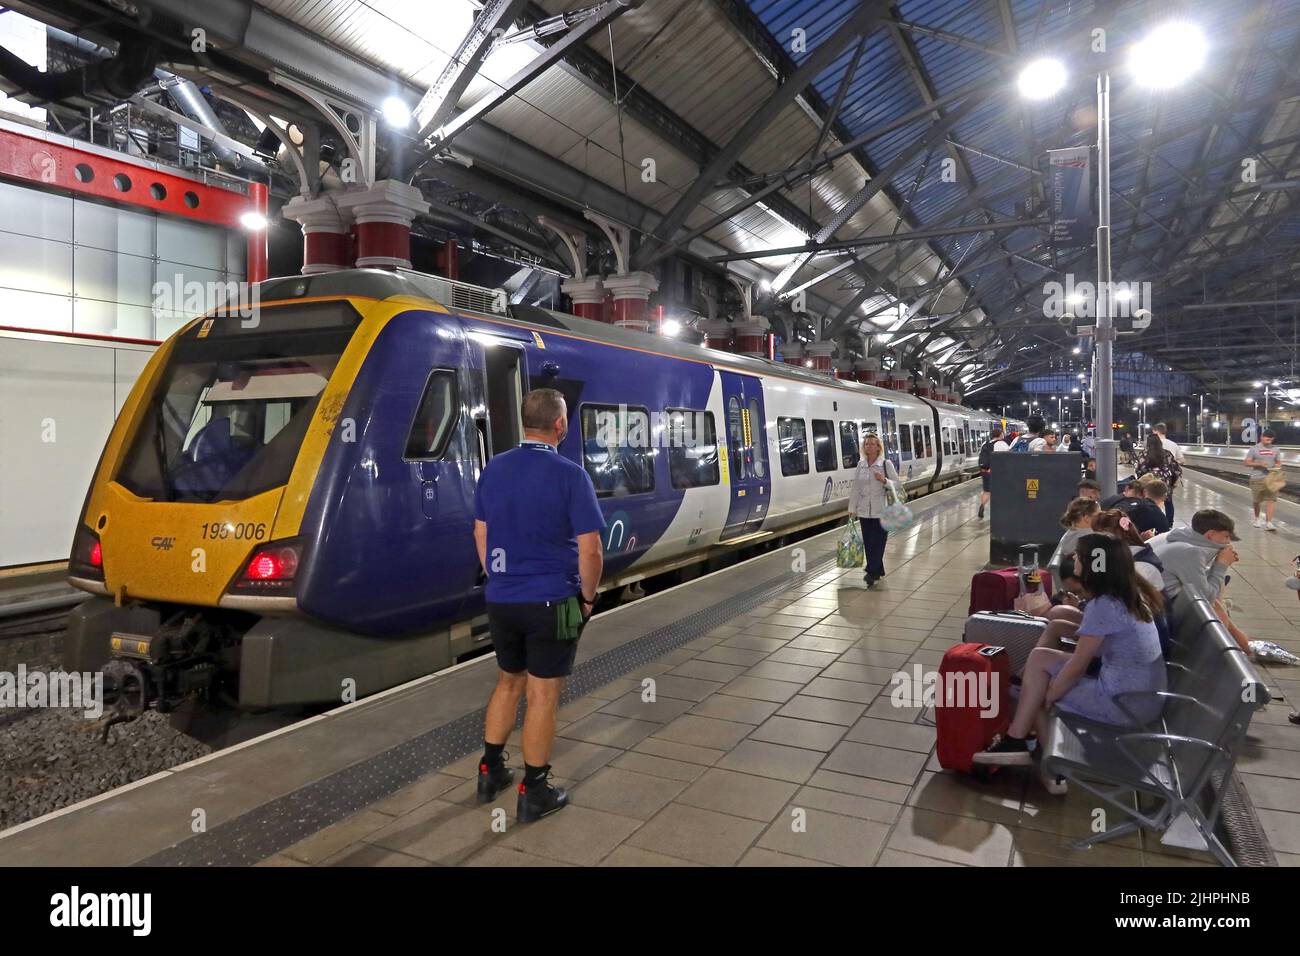 Northern 195006 Train to Manchester Airport, Liverpool Lime Street station, at night, Merseyside, England, UK, L1 1JD Stock Photo